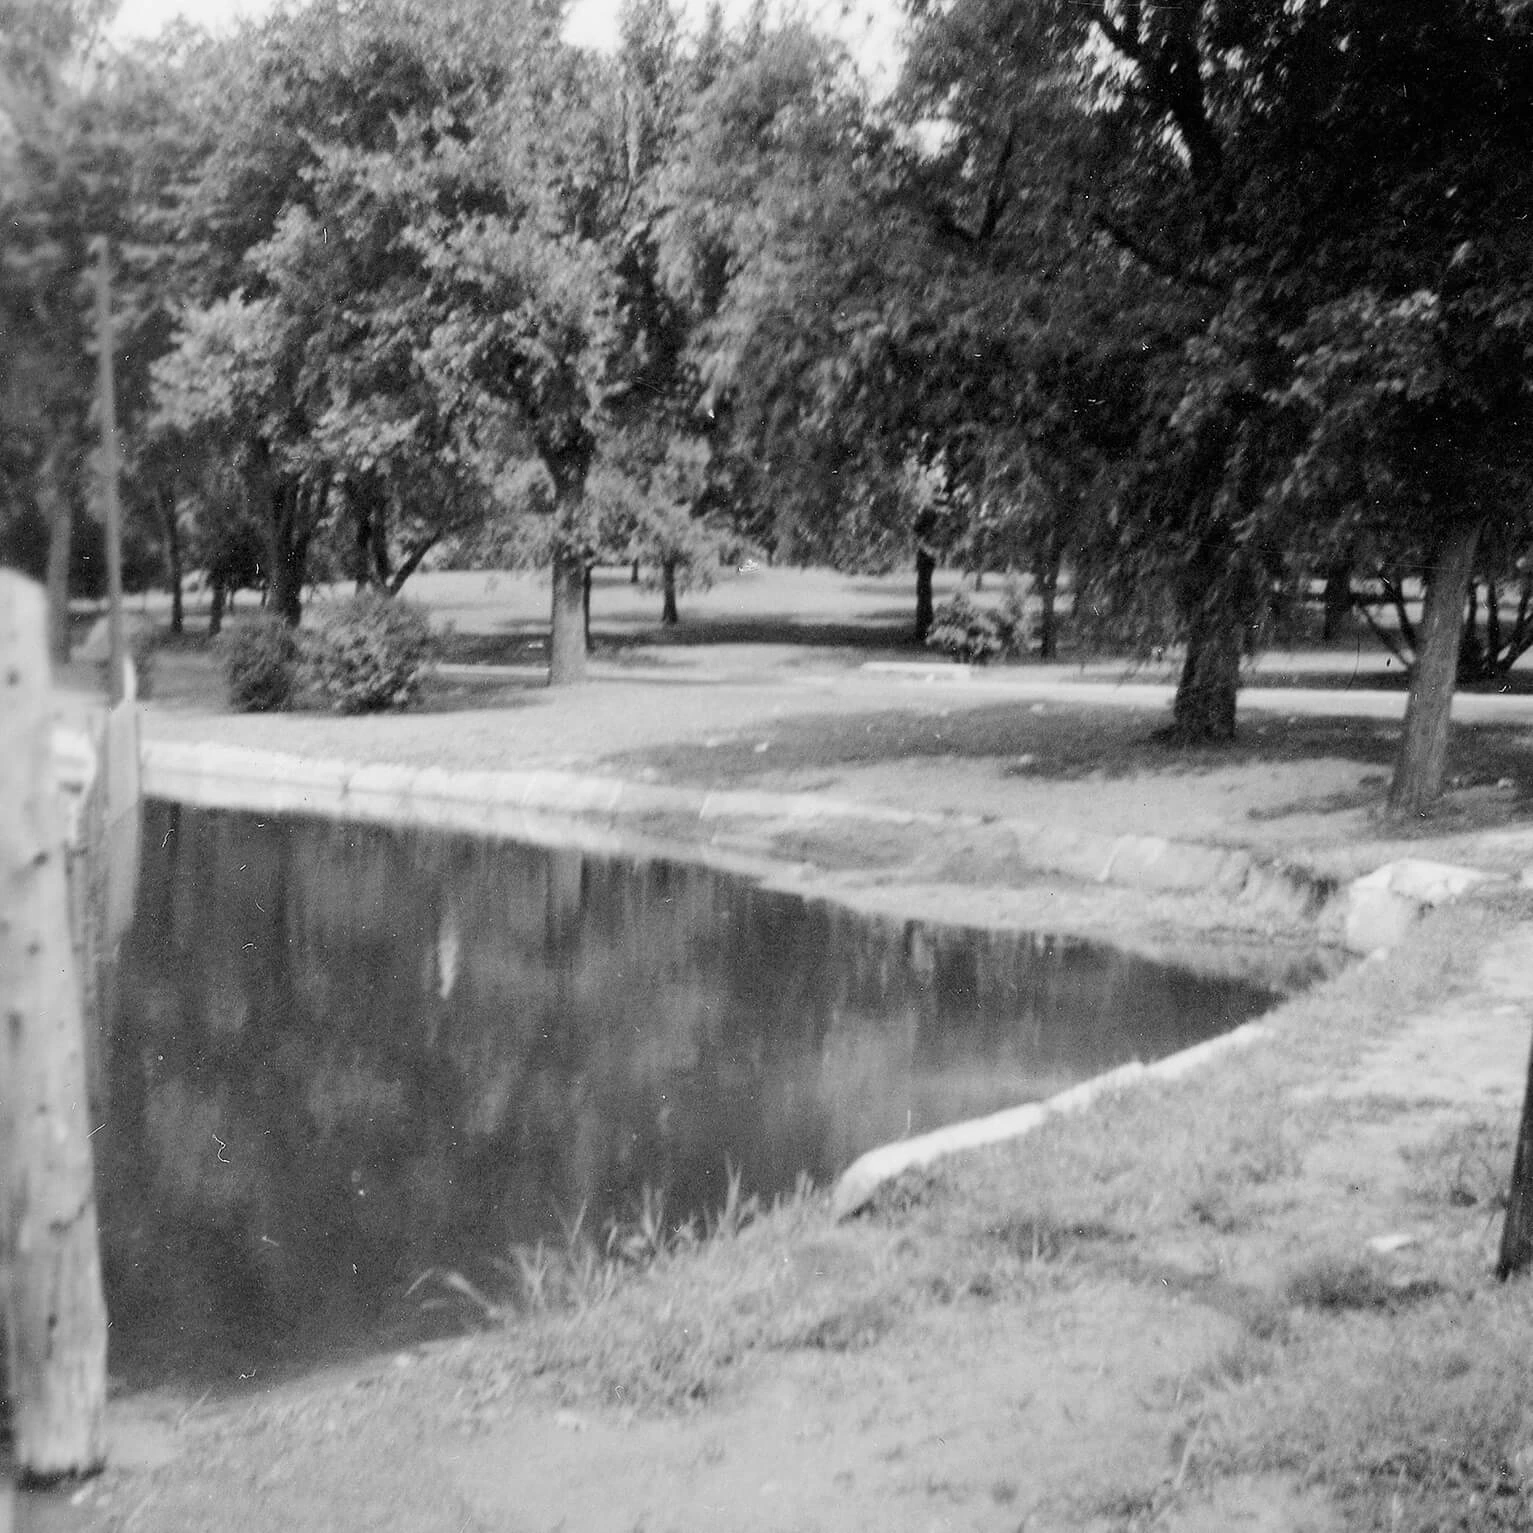 Black and white photo of the lake shoreline, which is grassy and a concrete curb.